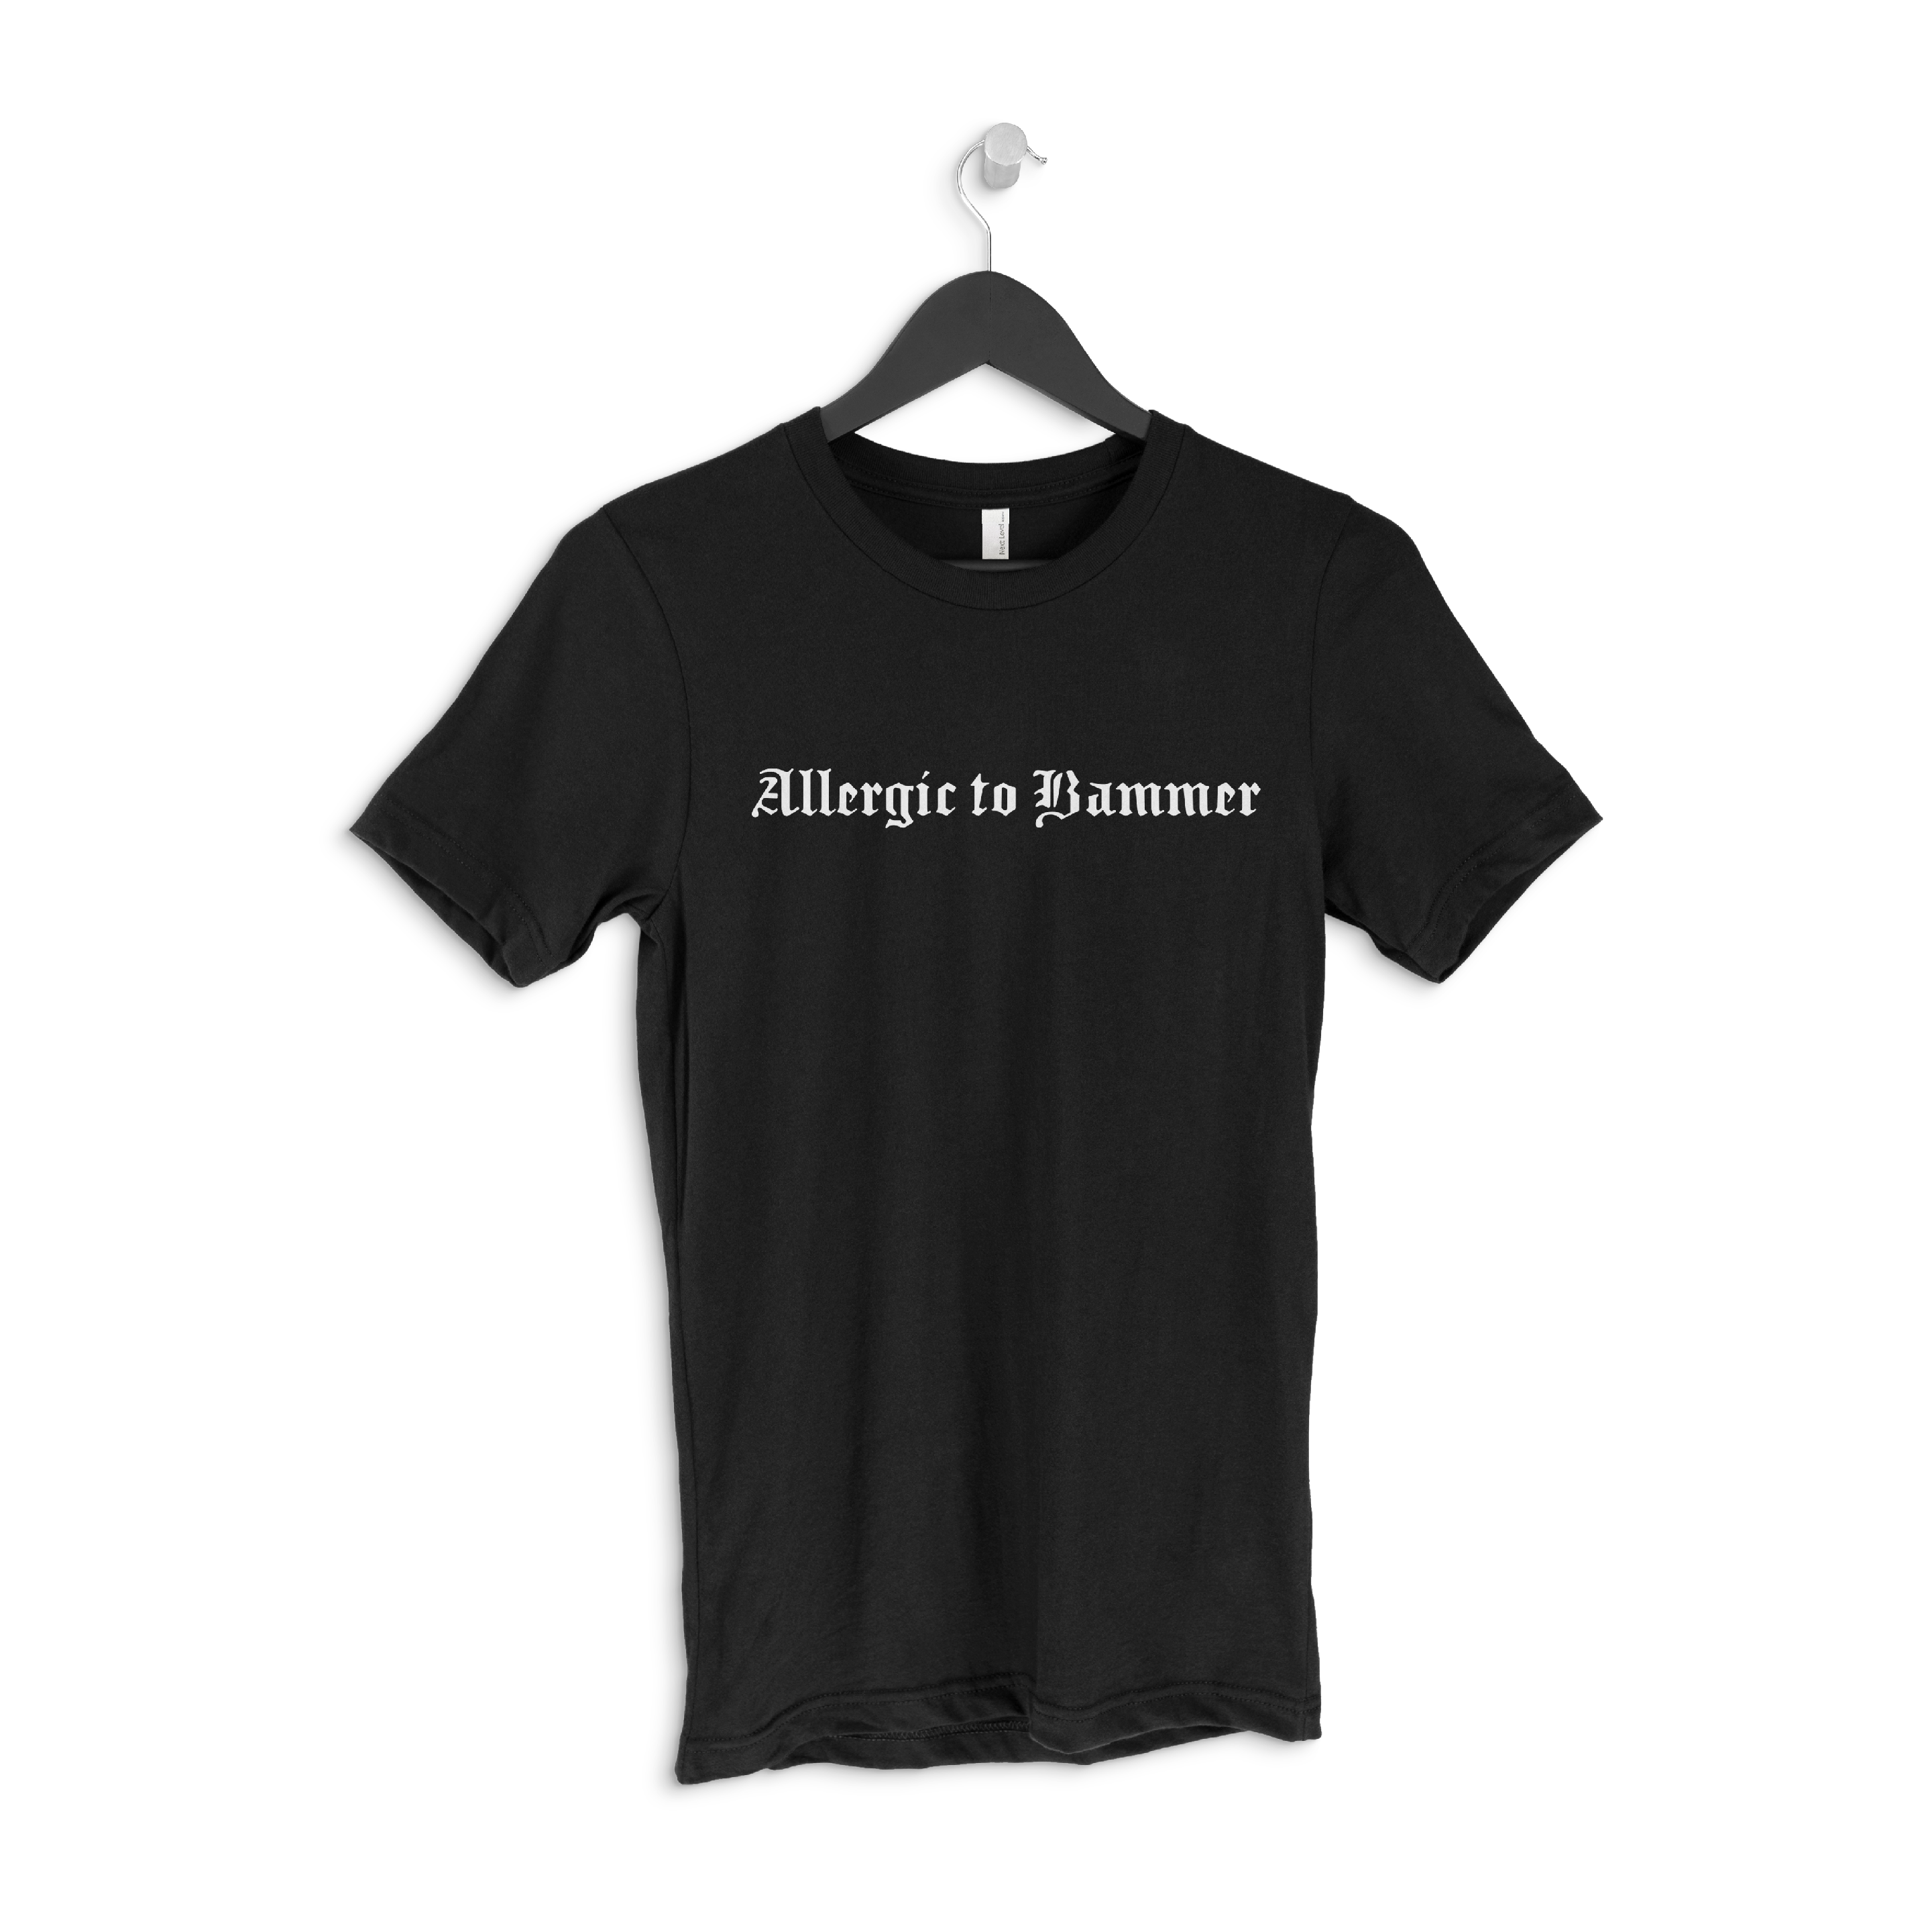 Allergic to Bammer T-Shirt from Botany Farms